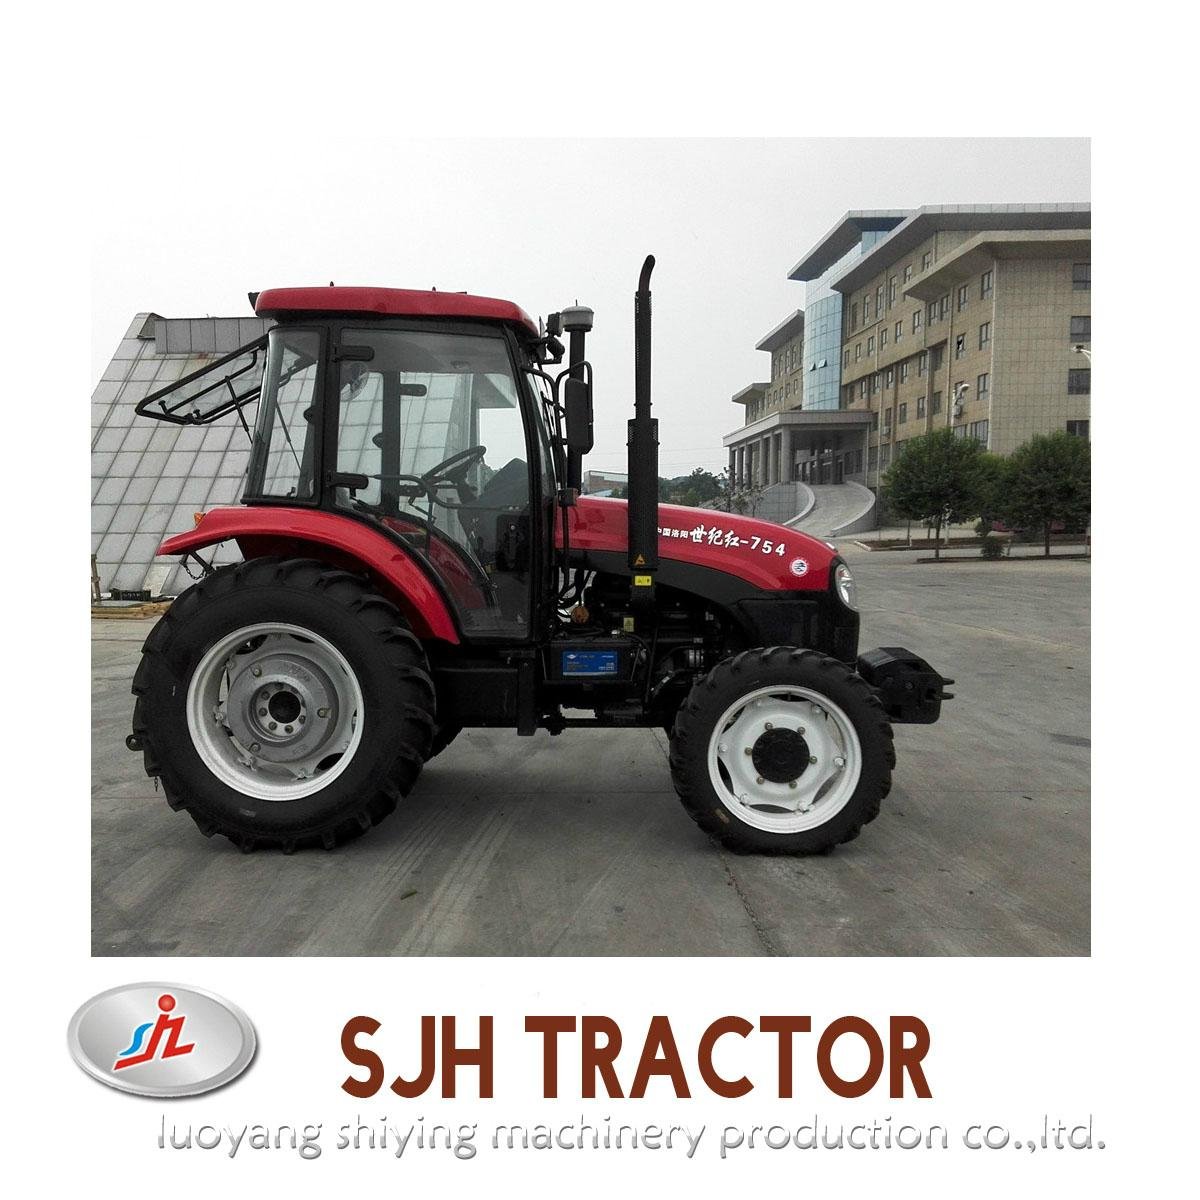 Made in China Modern Agricultural Use ,75hp Farm Tractor for Sale 5